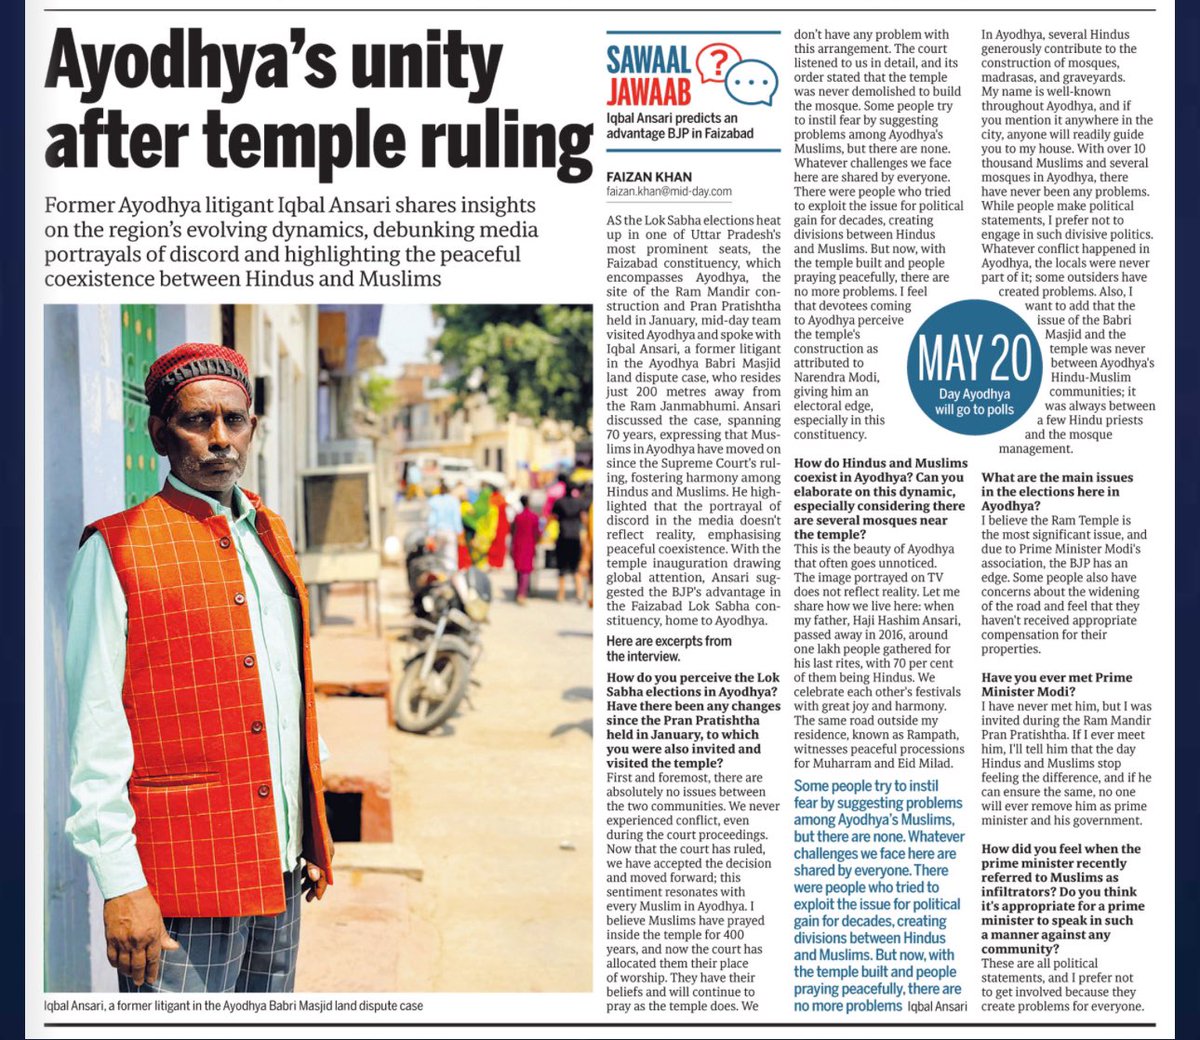 In #Ayodhya, I met Iqbal Ansari, the former litigant in the title case. Here's what he had to say. More ground reports soon.